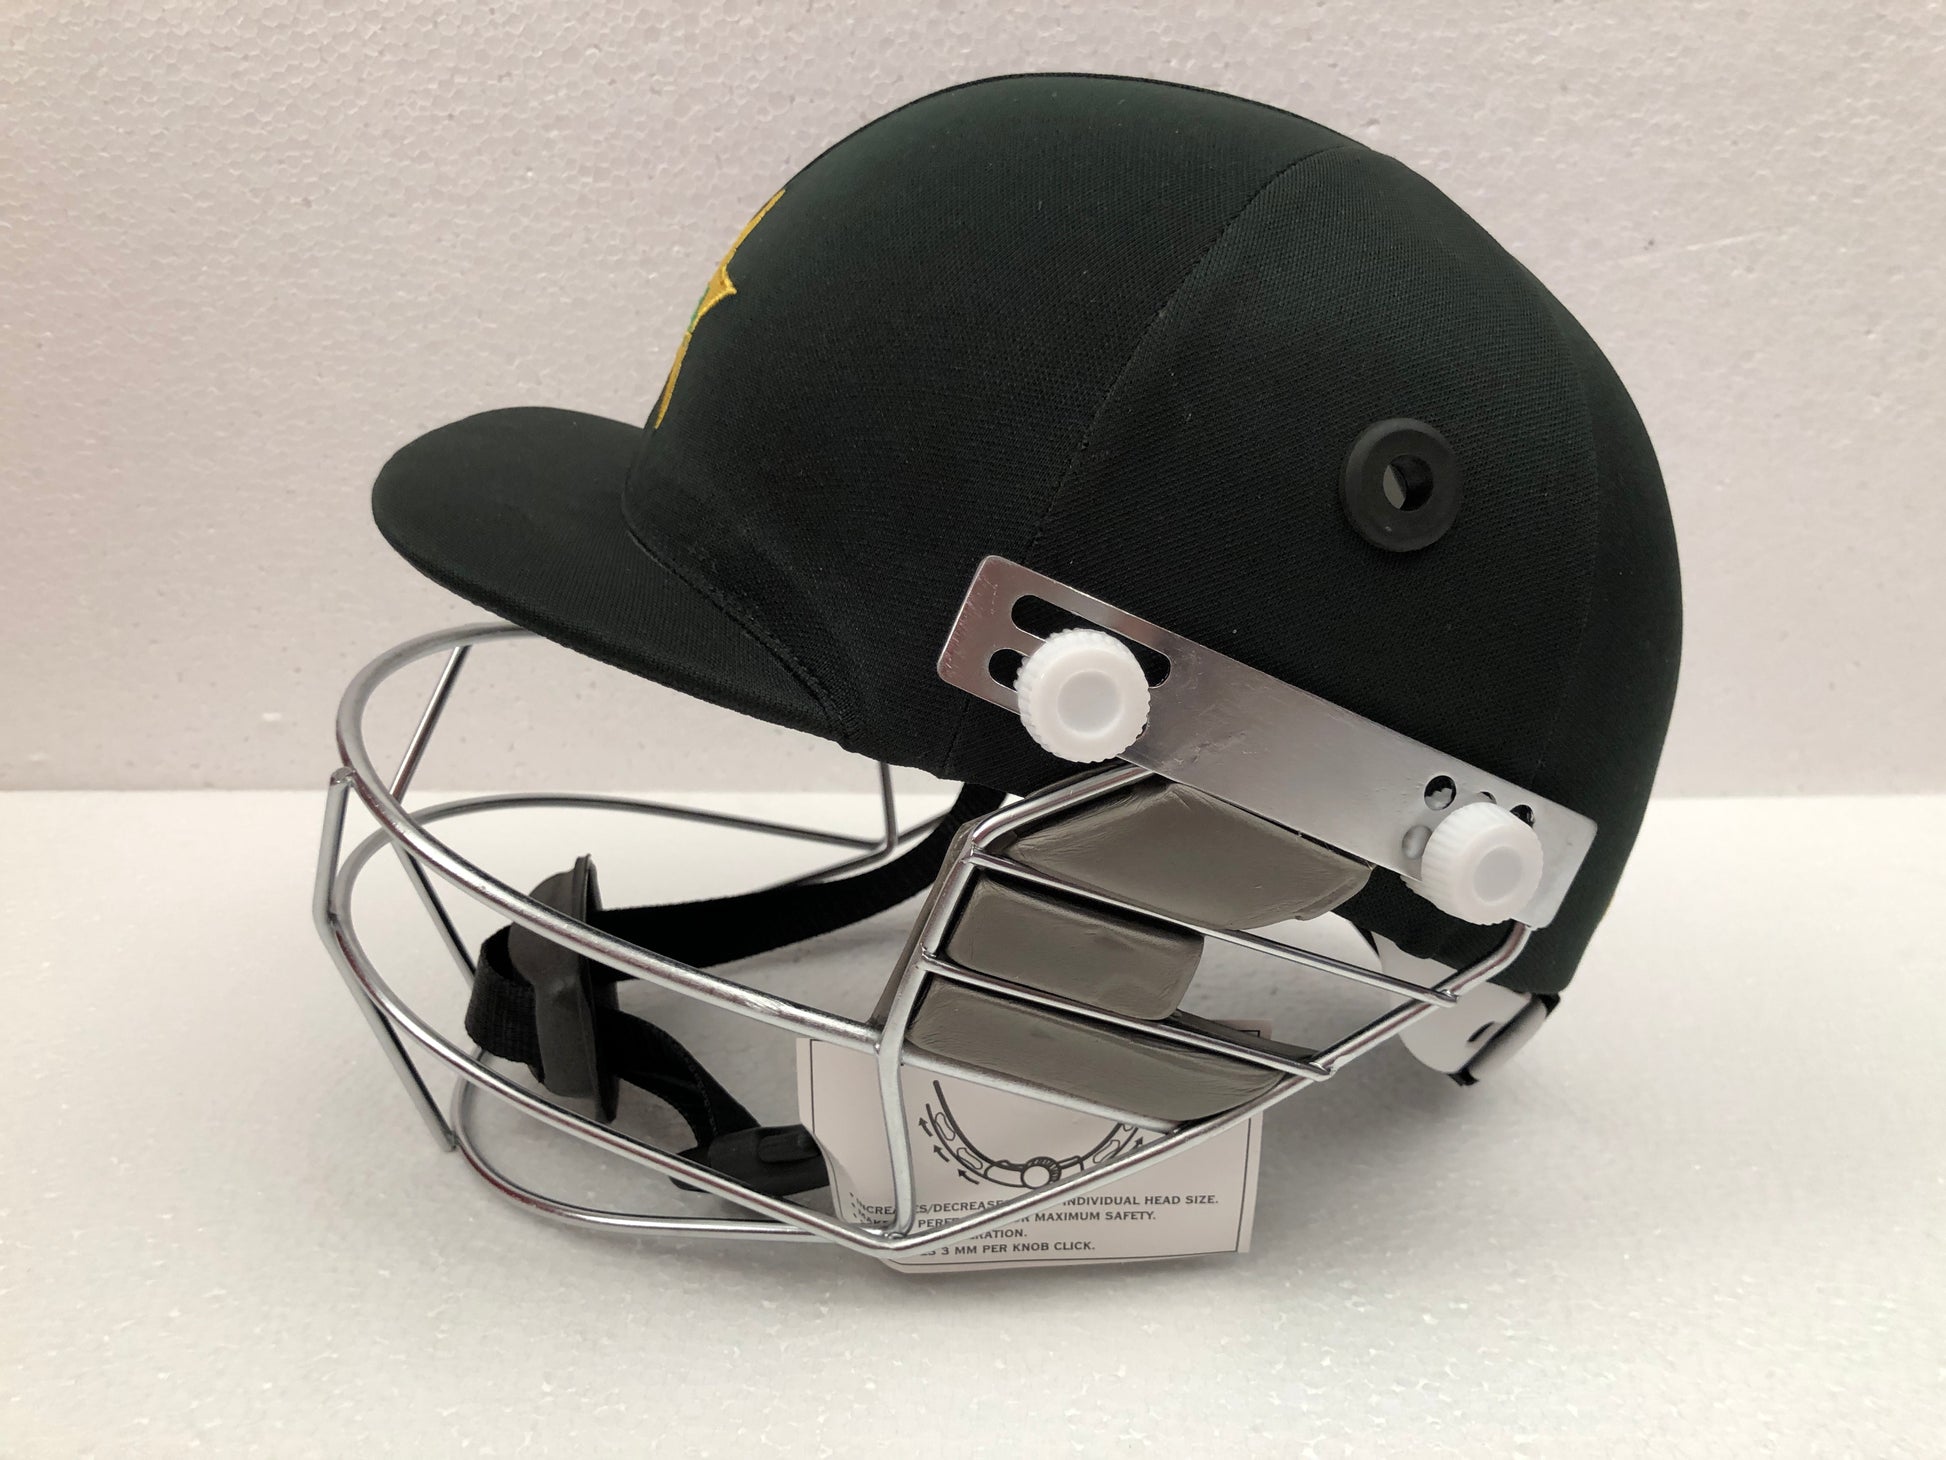 Black Ash custom International adjustable helmet, featuring a high impact polypropylene shell and chrome finish steel grill with 8 micro adjustments for enhanced protection and visibility, sweat-absorbent padding, and soft ear protection, adjustable to fit sizes 52-58 cm.